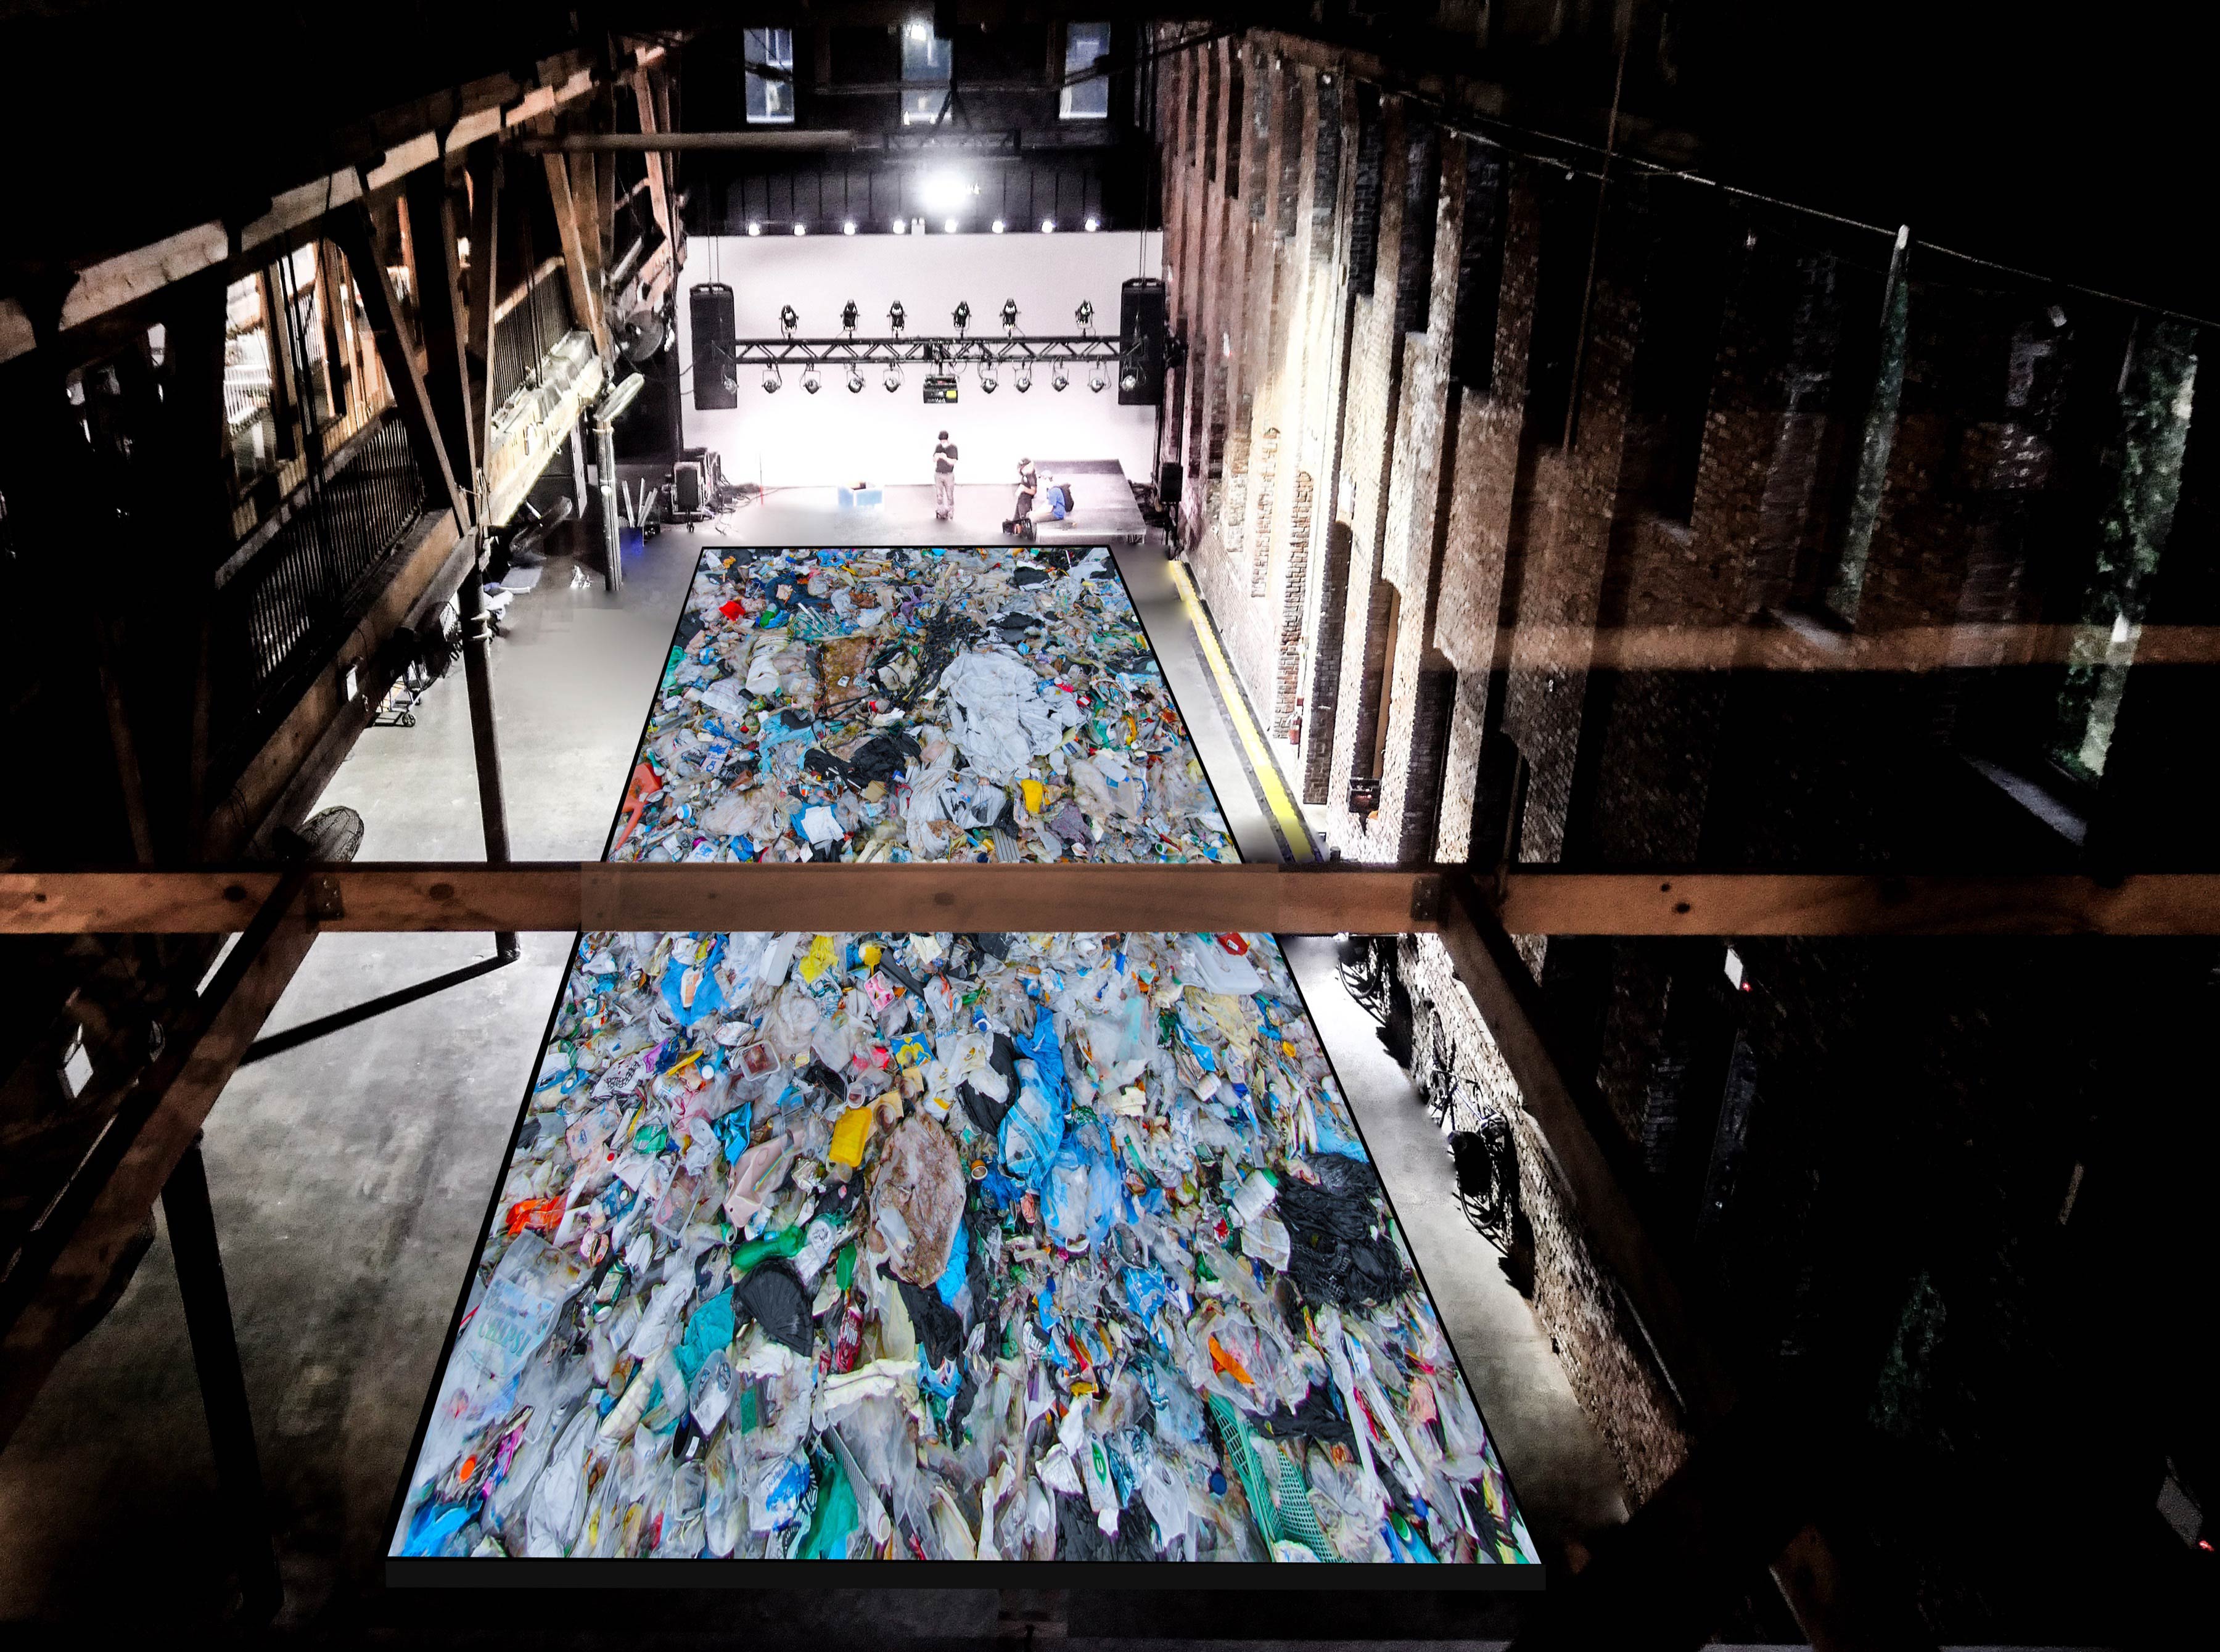 A top-down photograph of a giant, football field-esque gallery space with a giant (2,000 sq feet) rectilinear pool in the middle, packed seemingly thousands of single-use plastic items